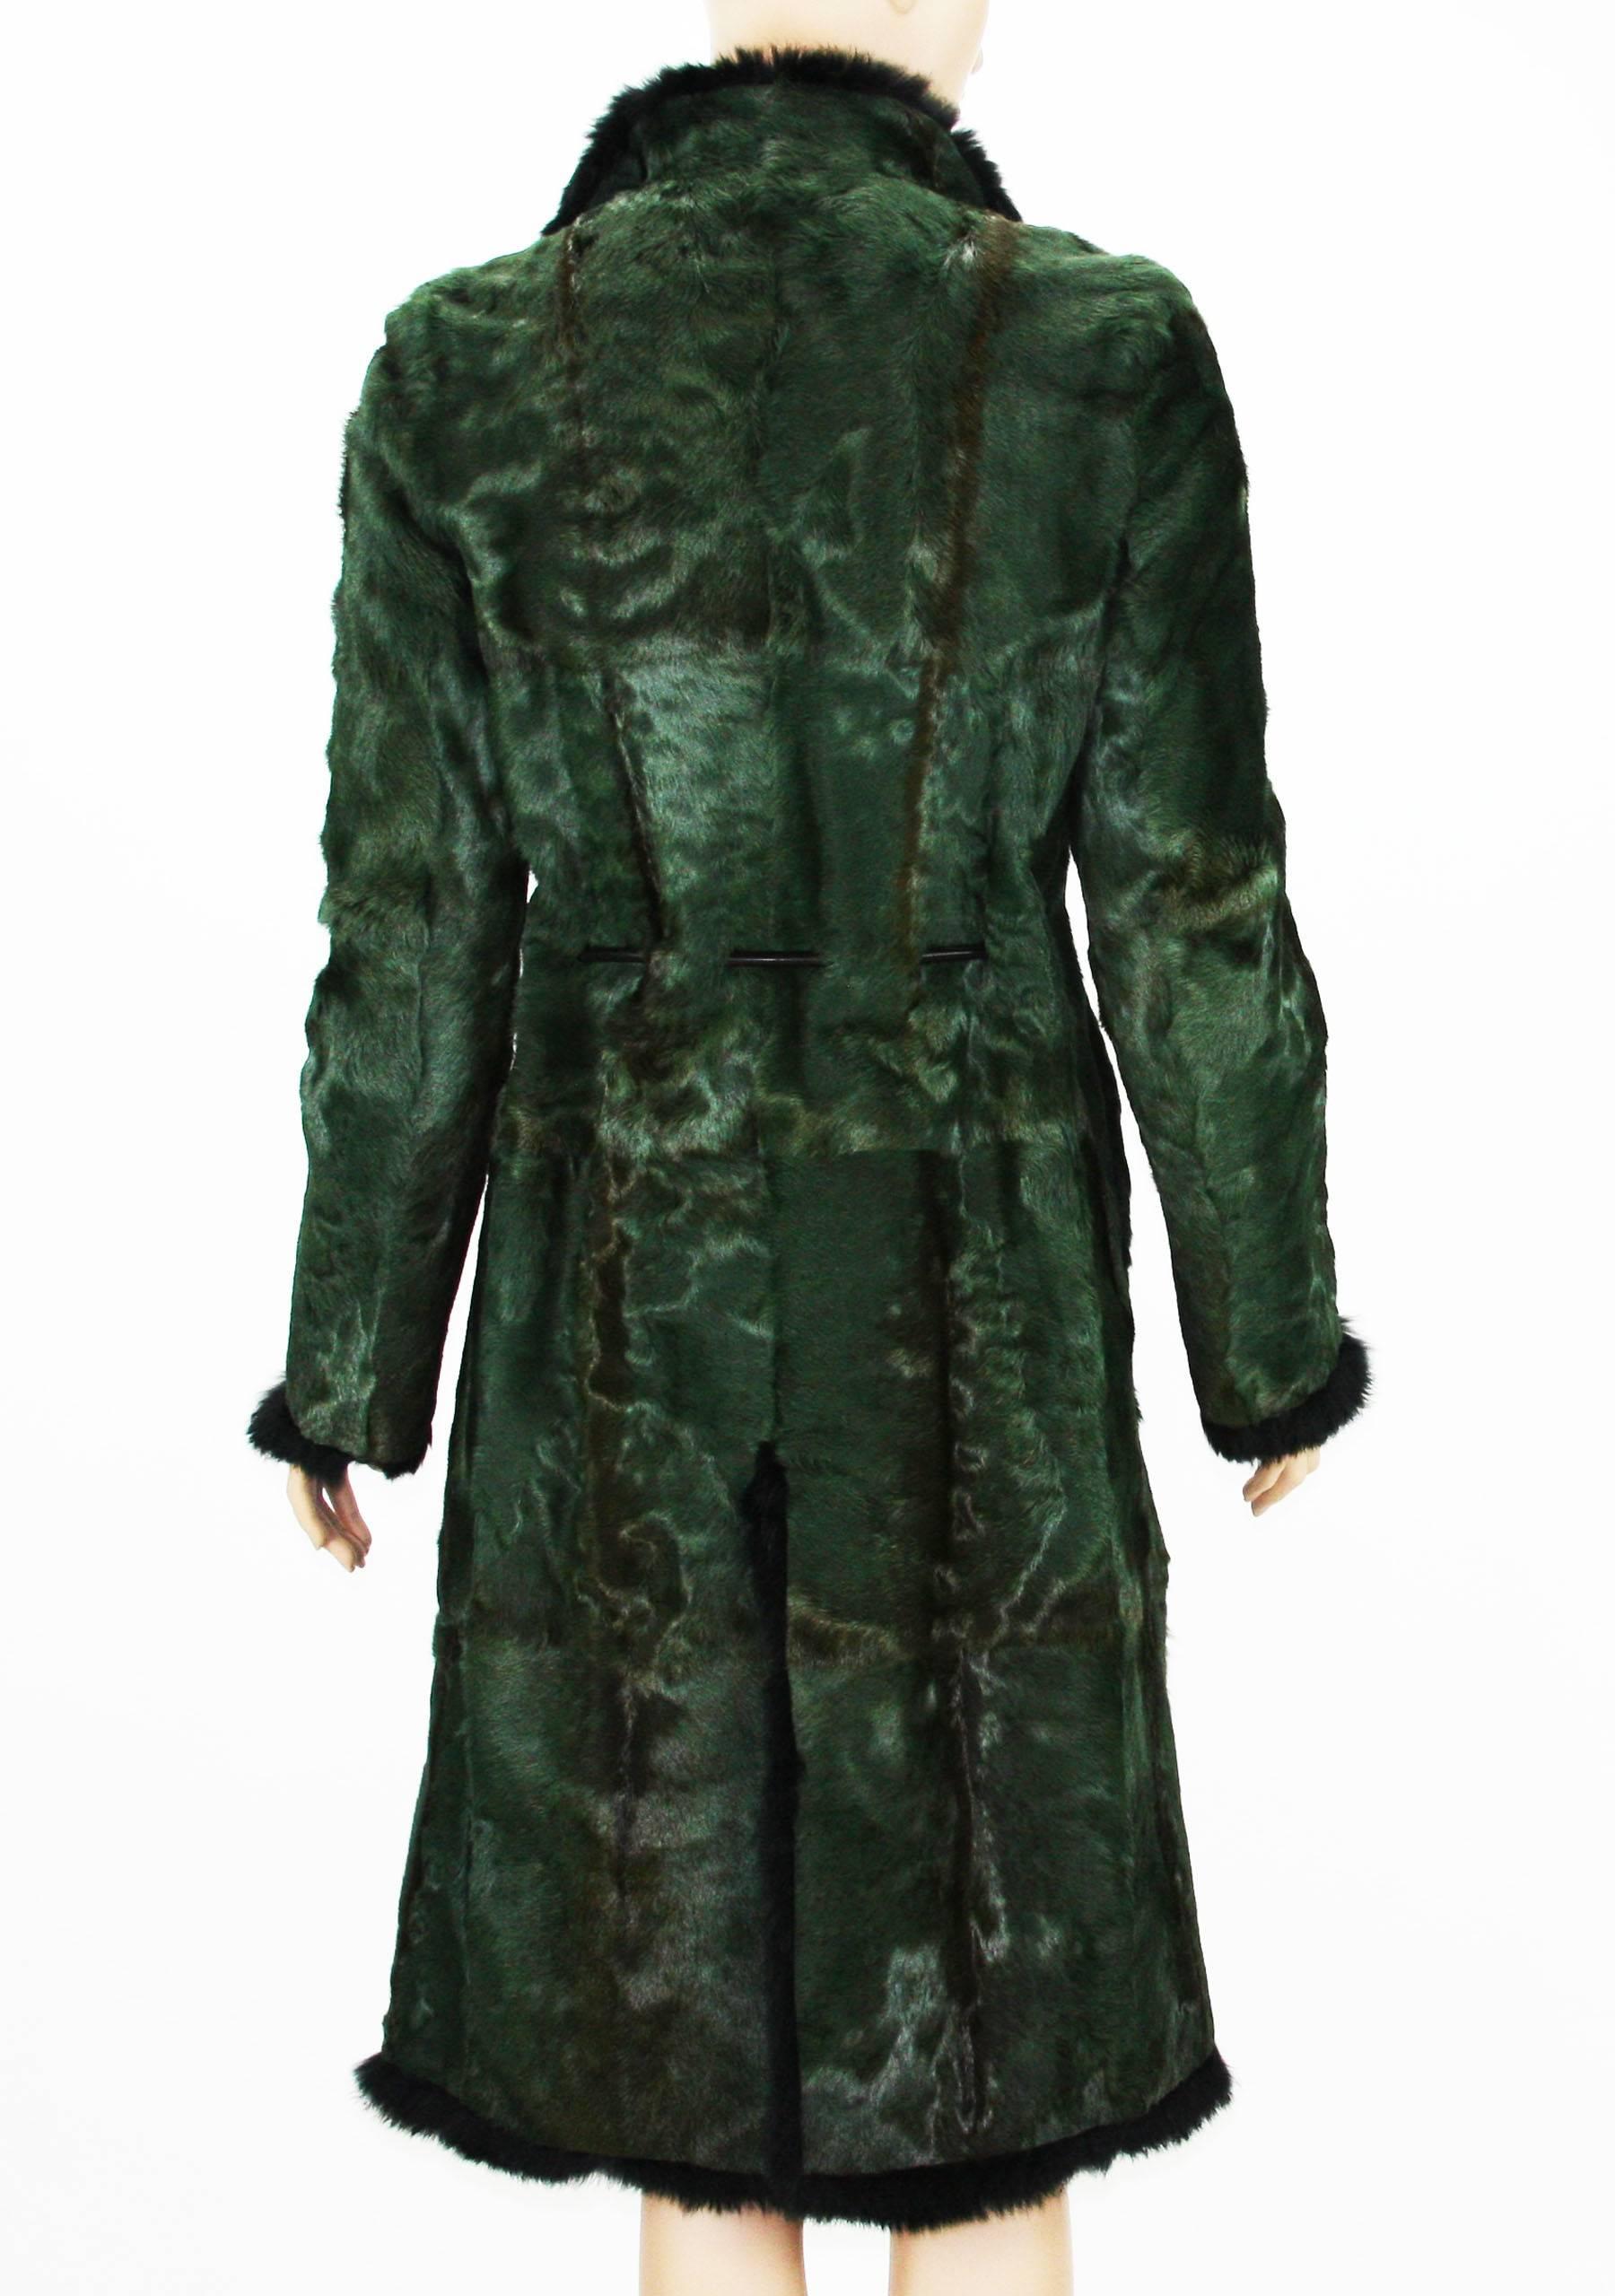 Tom Ford for Gucci 1999 Collection Reversible Emerald Green Fur Coat It. 40 For Sale 1